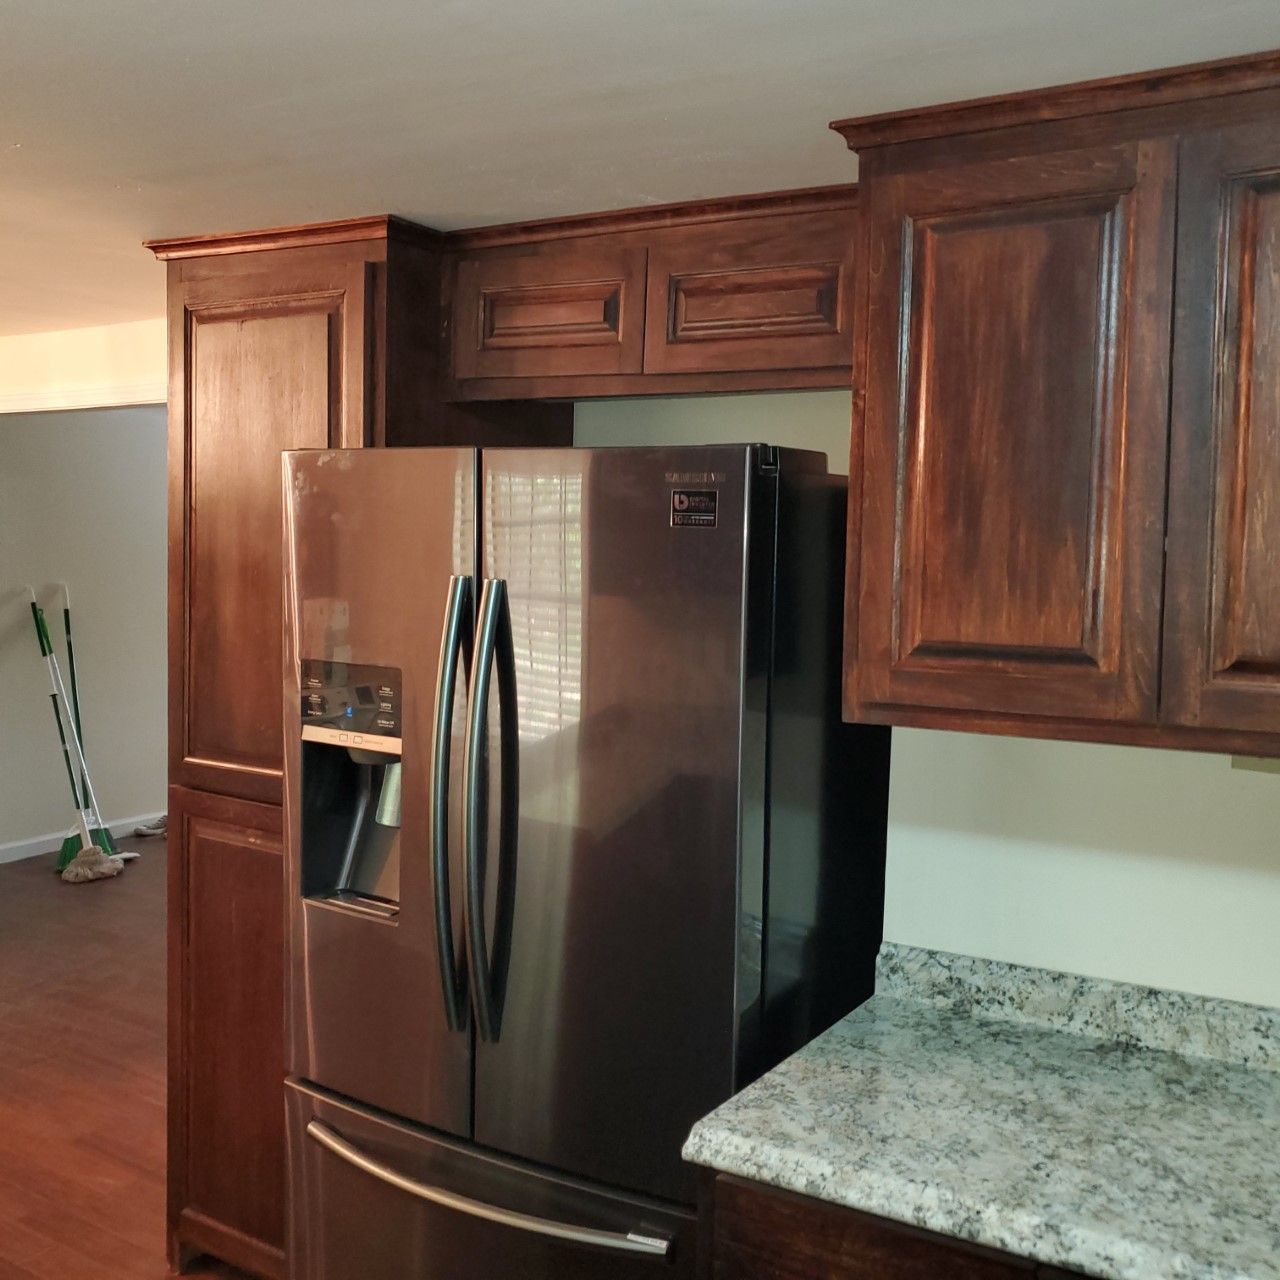 A kitchen with a stainless steel refrigerator and wooden cabinets